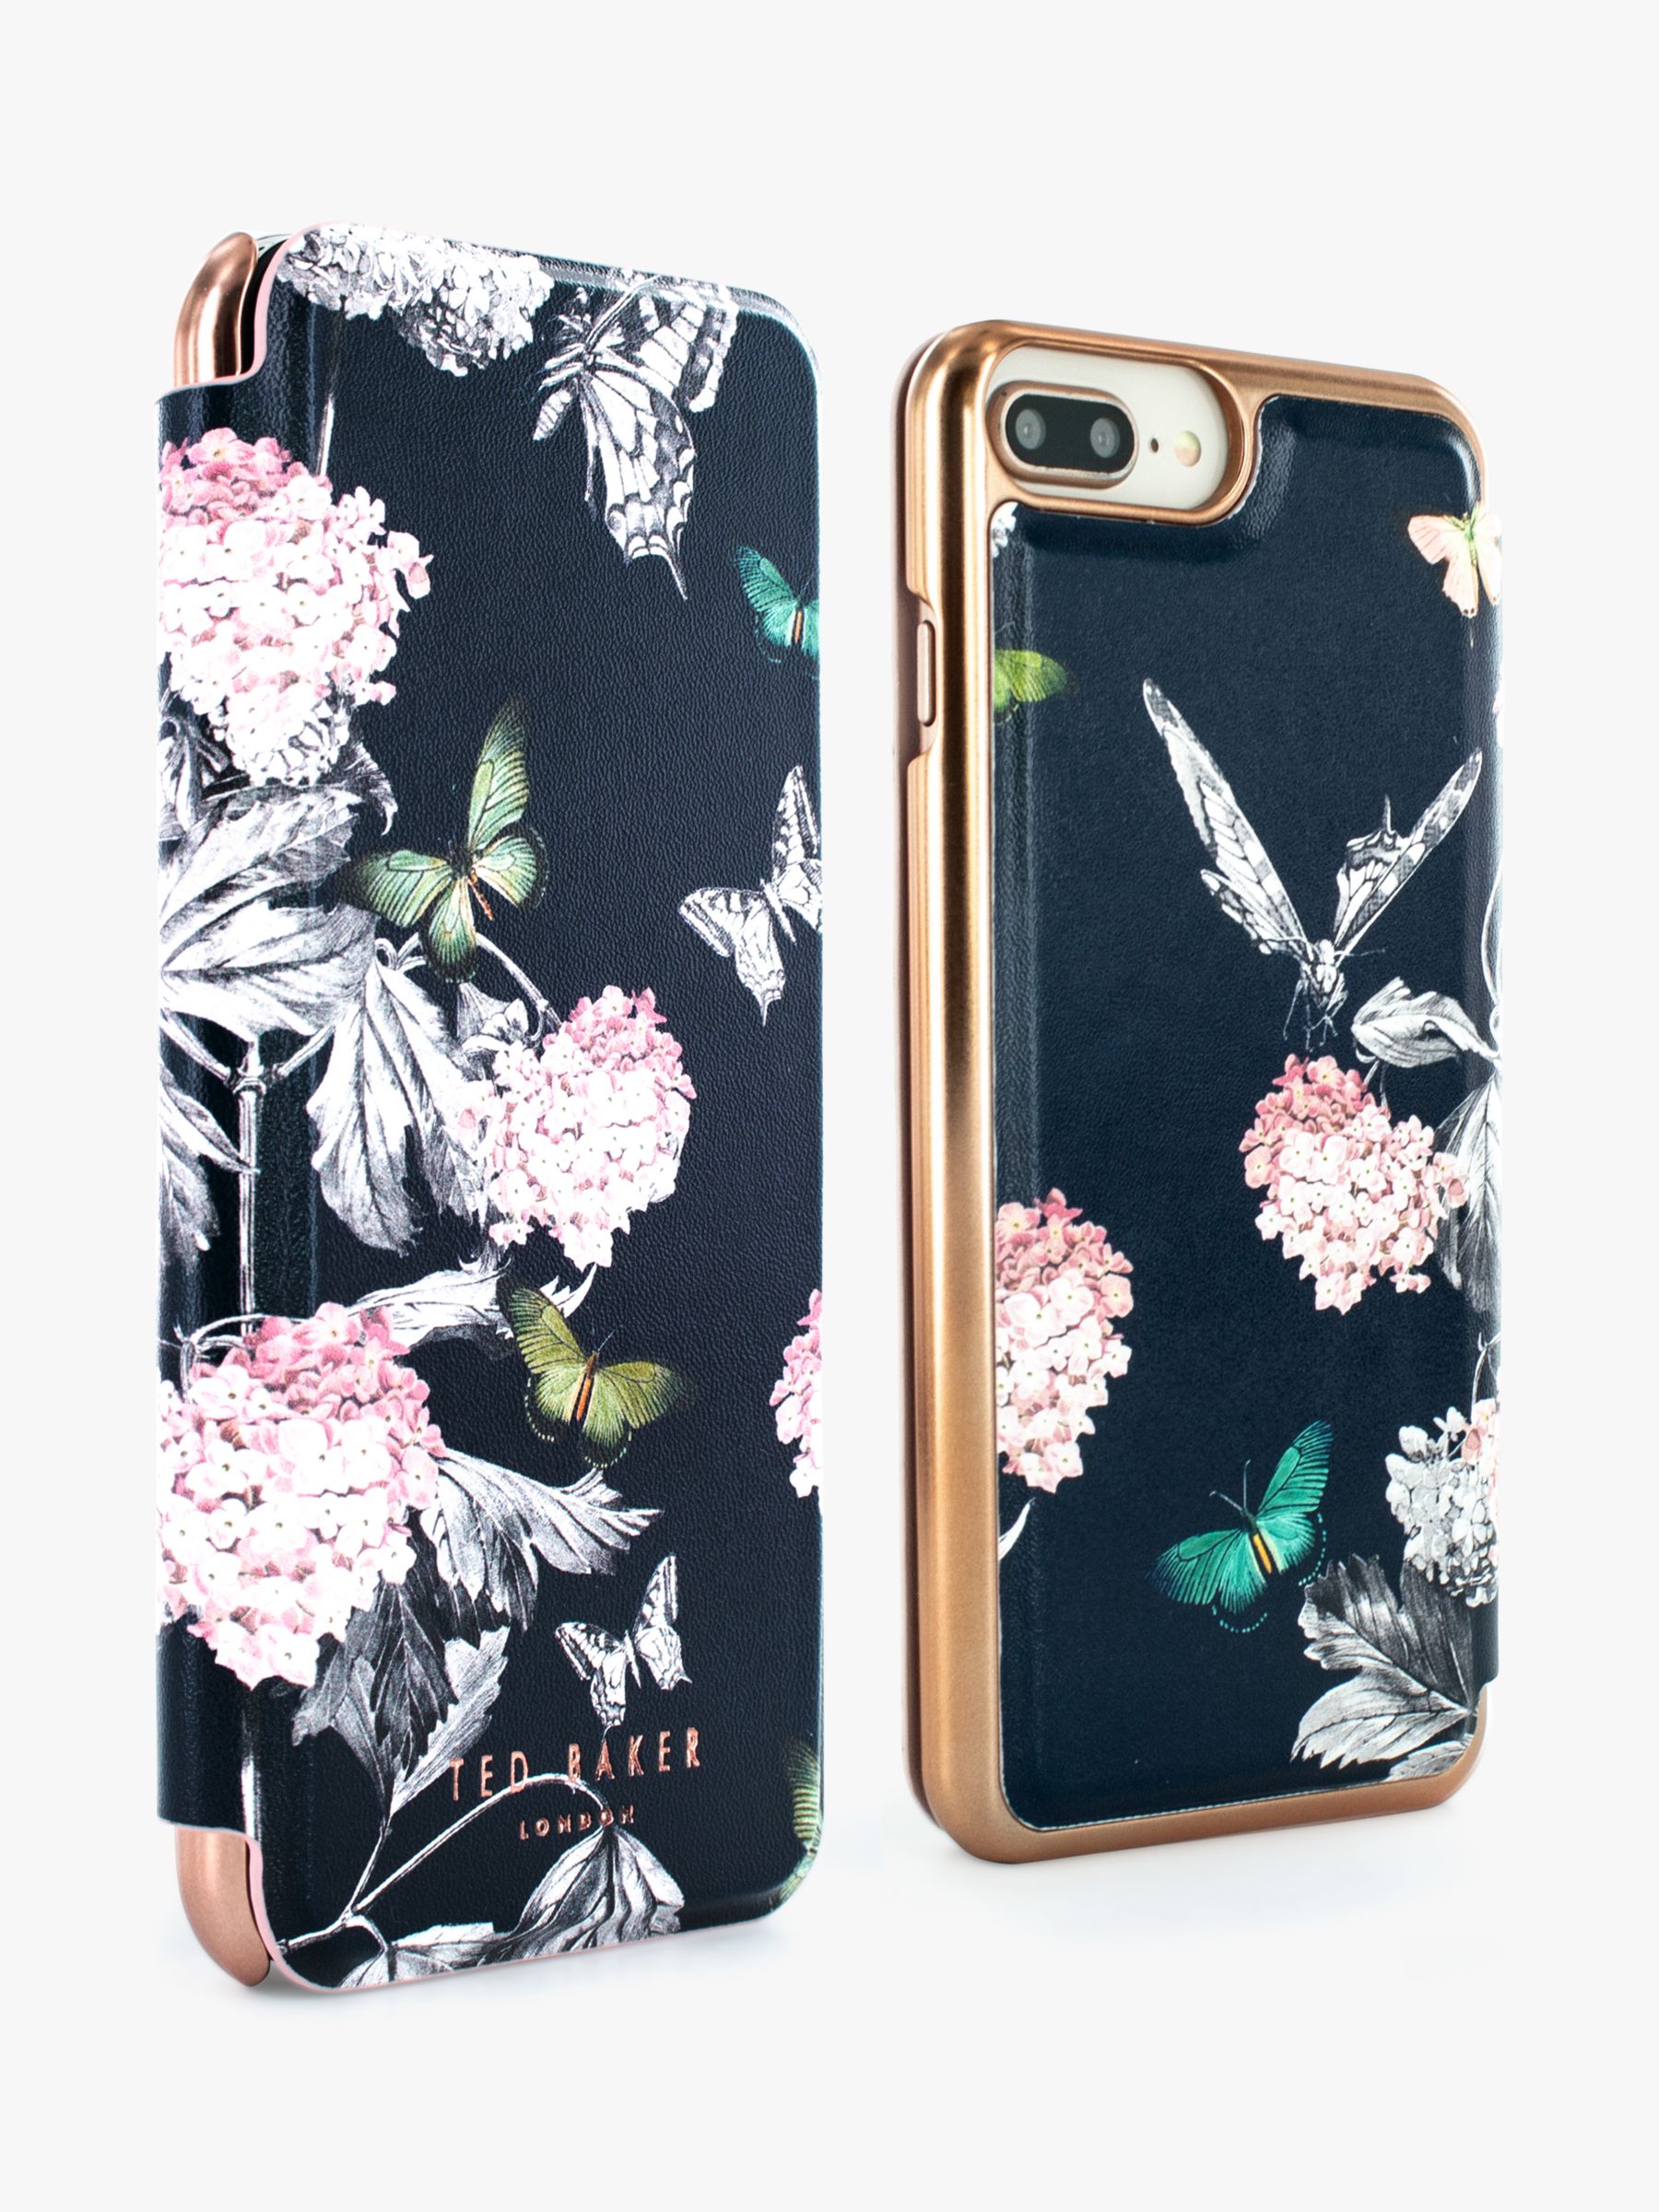 Ted Baker Folio Moondance Case for iPhone 7 Plus and iPhone 8 Plus